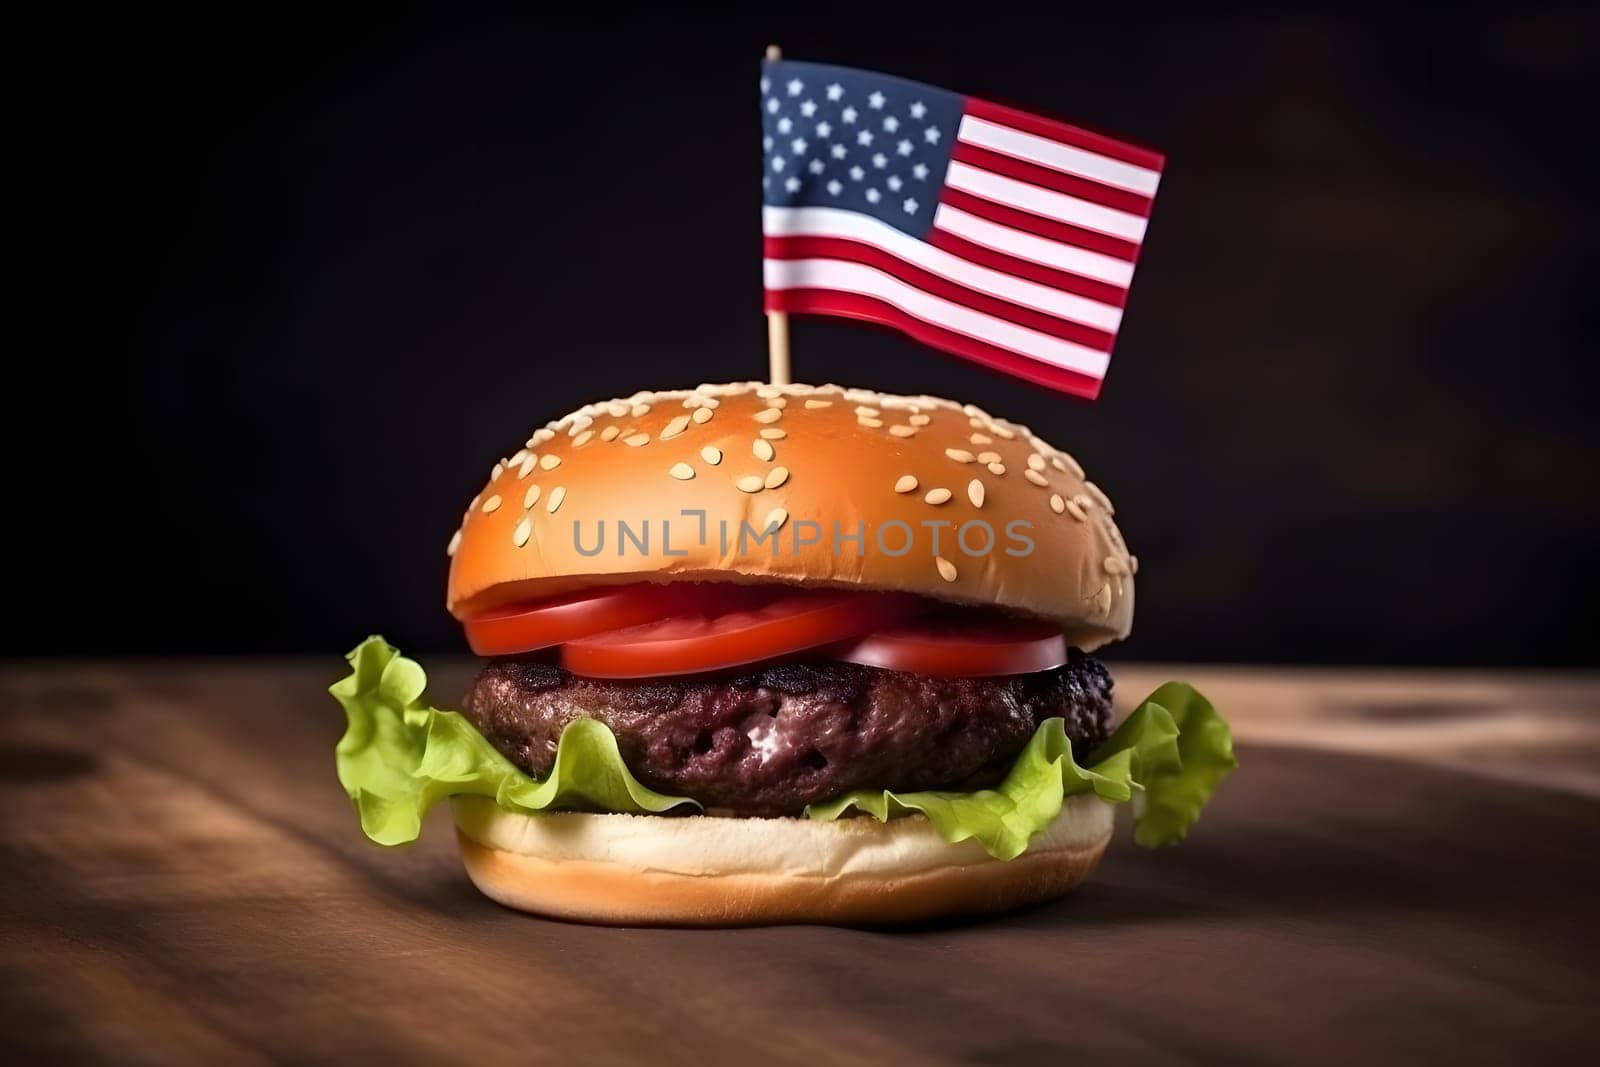 hamburger with small american flag on it, dark background, US patriotic proud theme, neural network generated image by z1b